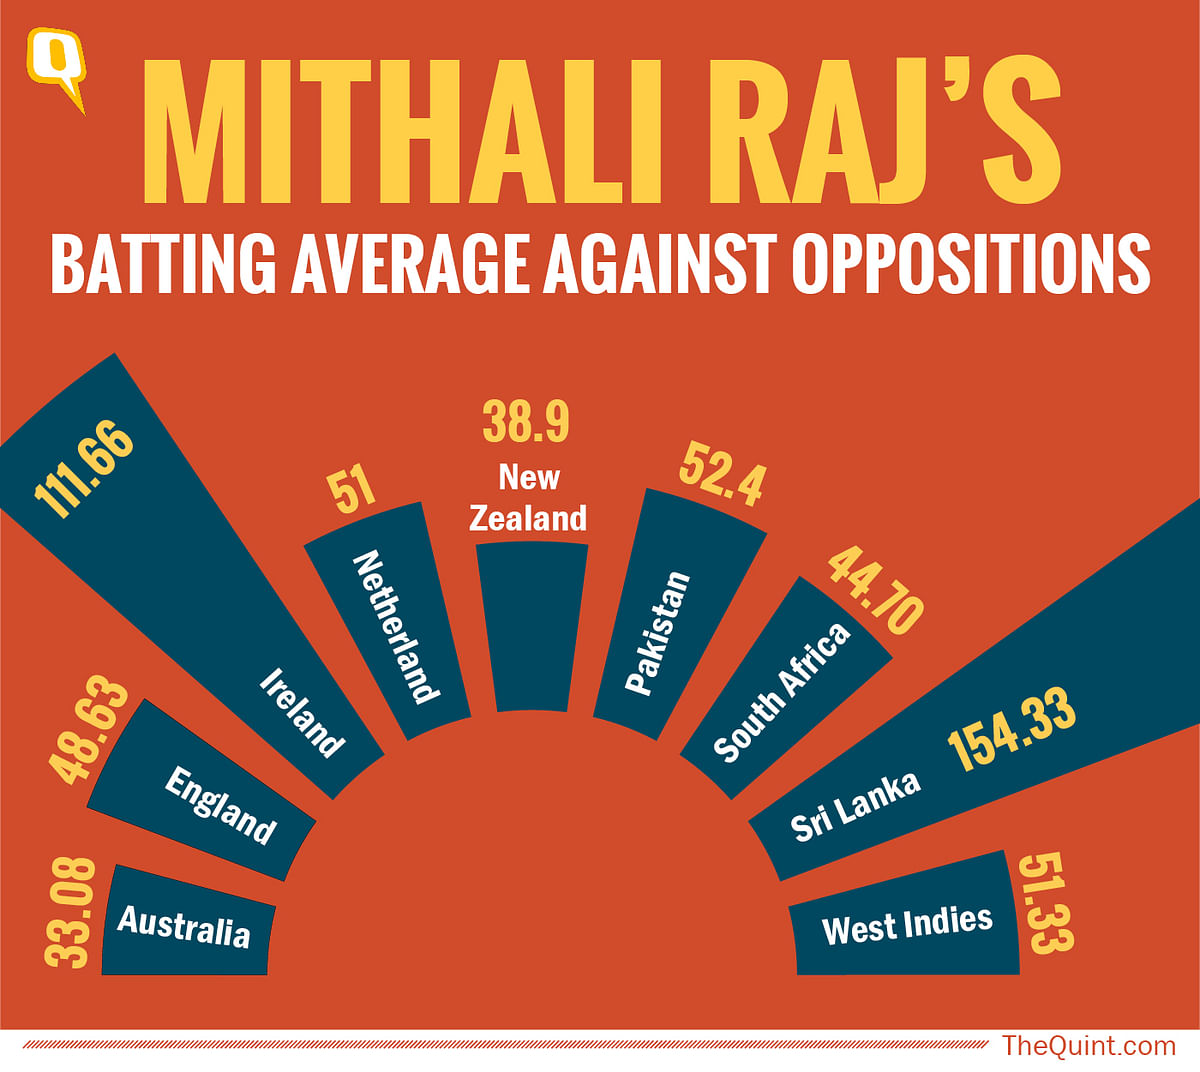 Mithali Raj over the years: A look at the career of one of India’s greatest cricketers.